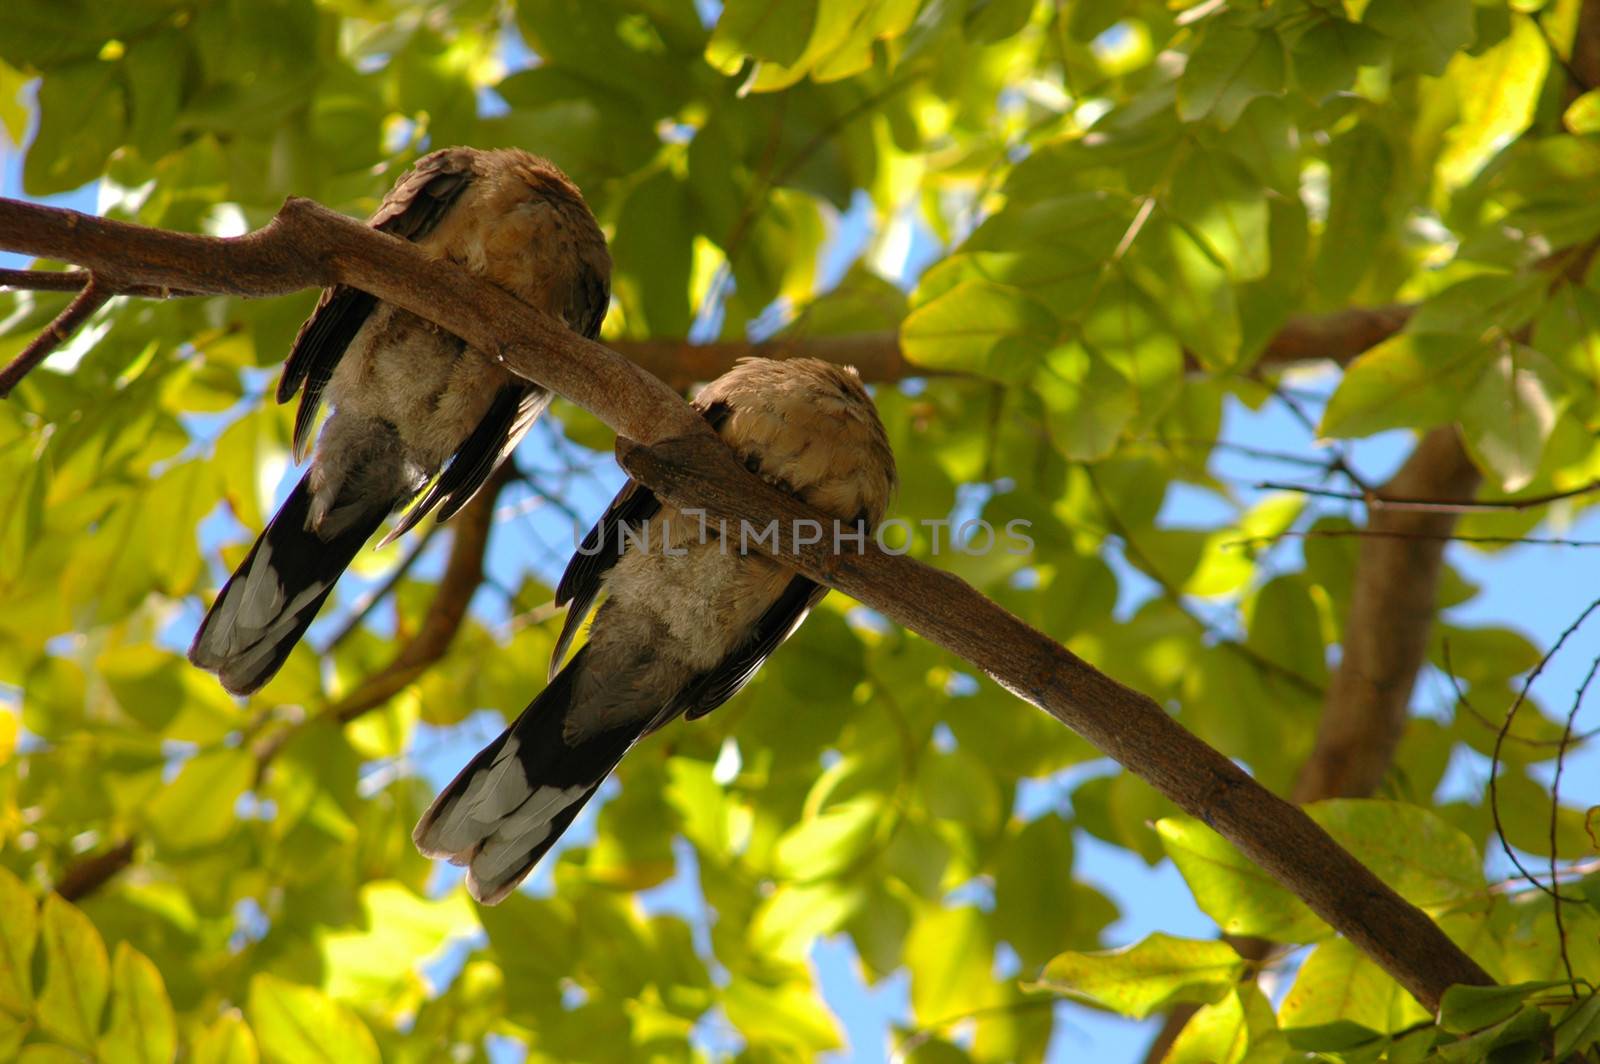 A pair of birds sleeping in a tree